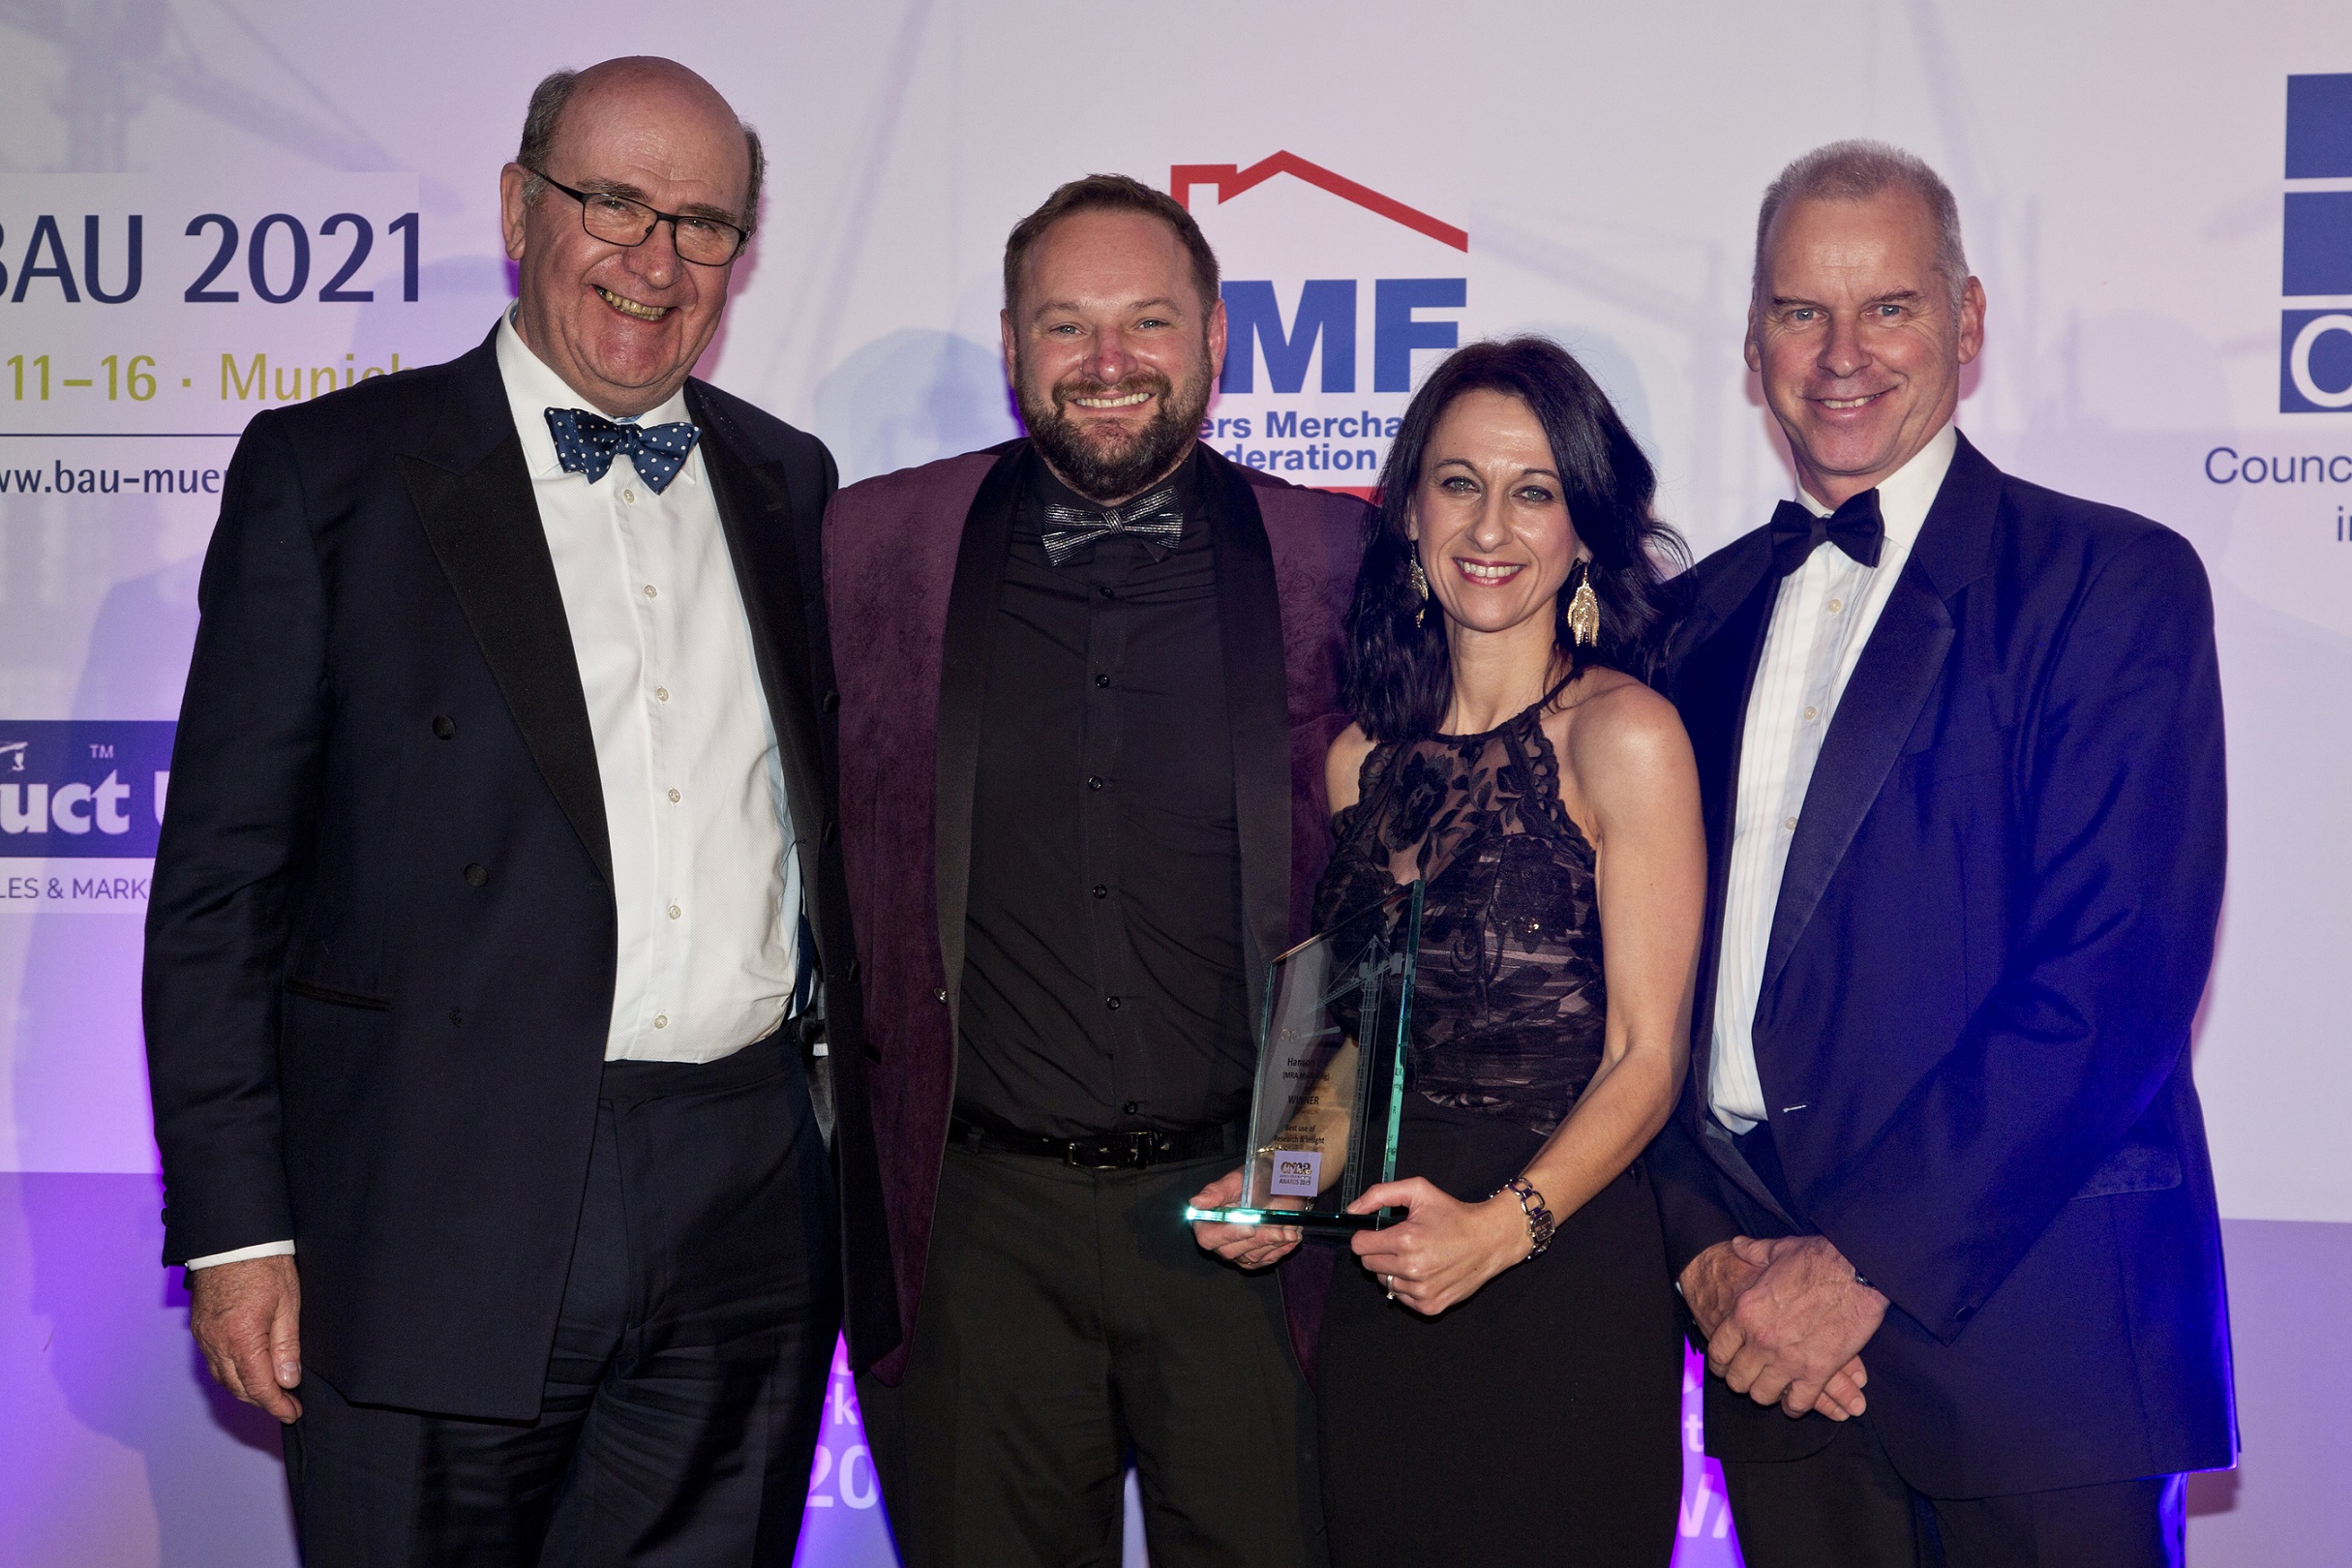 MRA Research wins Best Research & Insight Award for Hanson Cement at the Construction Marketing Awards @MRA_Research_UK